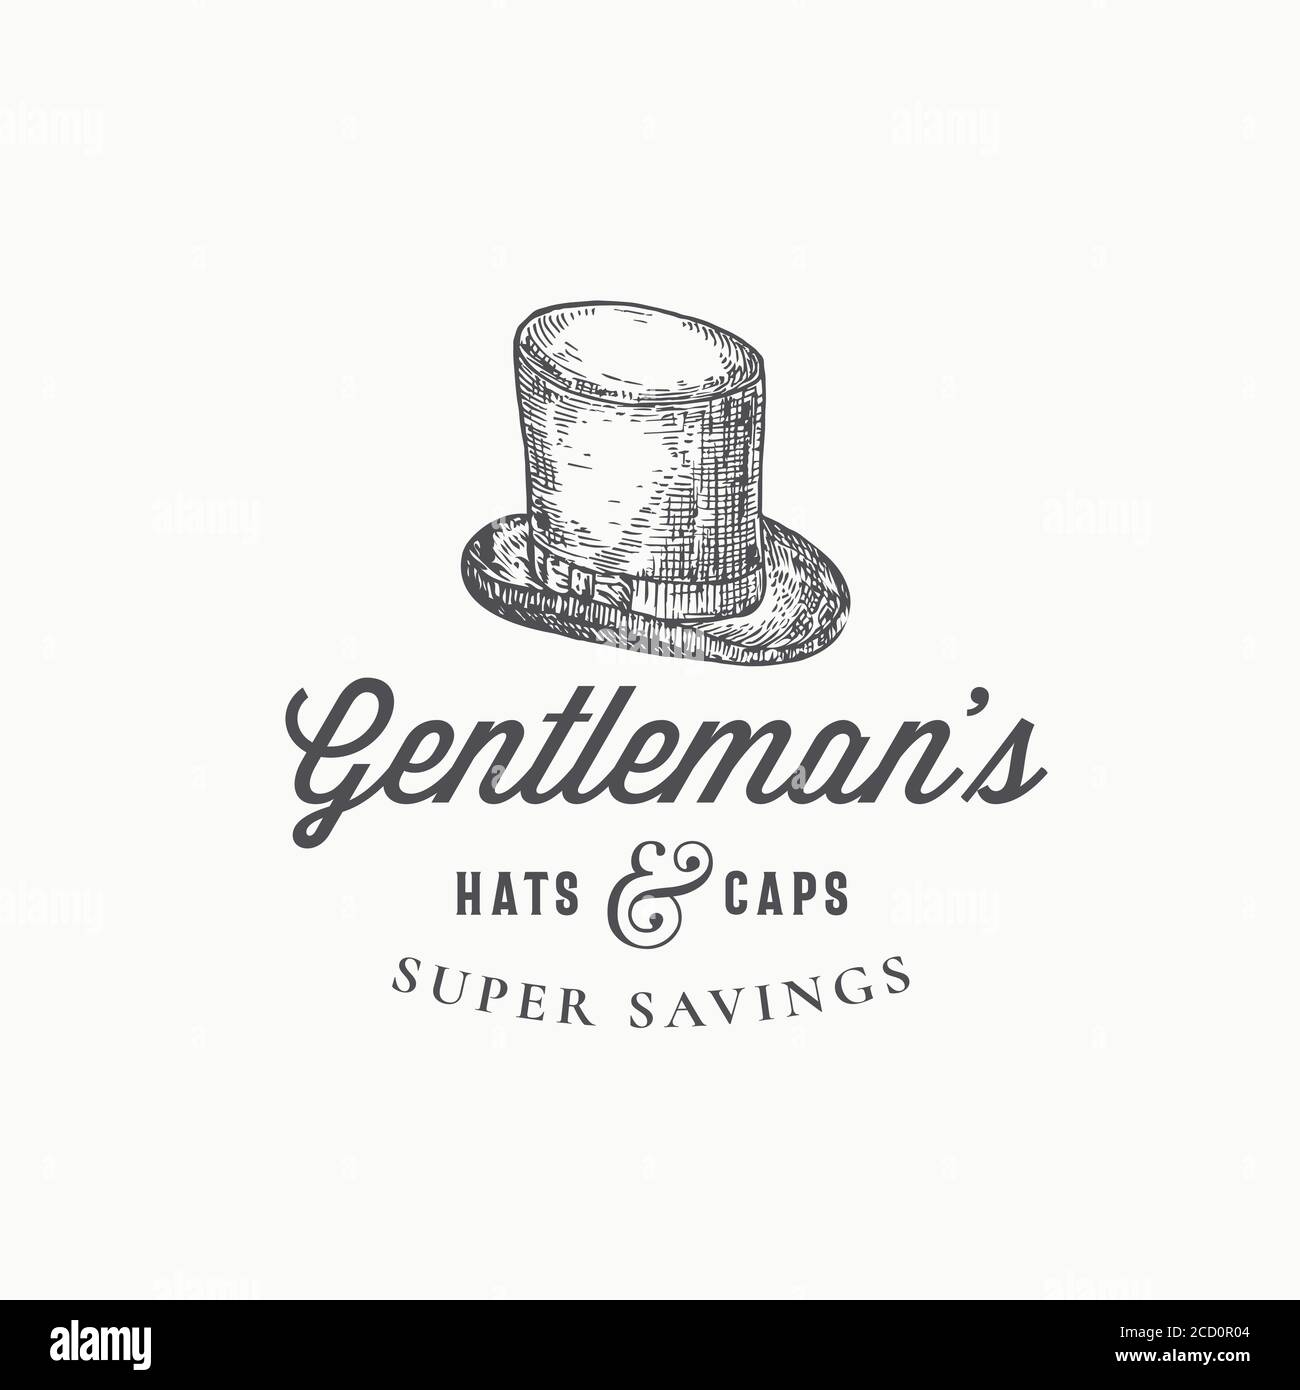 Gentlemans Top Hat Abstract Vector Sign, Symbol or Logo Template. Cylinder Sketch Drawing with Retro Typography and Shabby Textures. Vintage Engraving Stock Vector